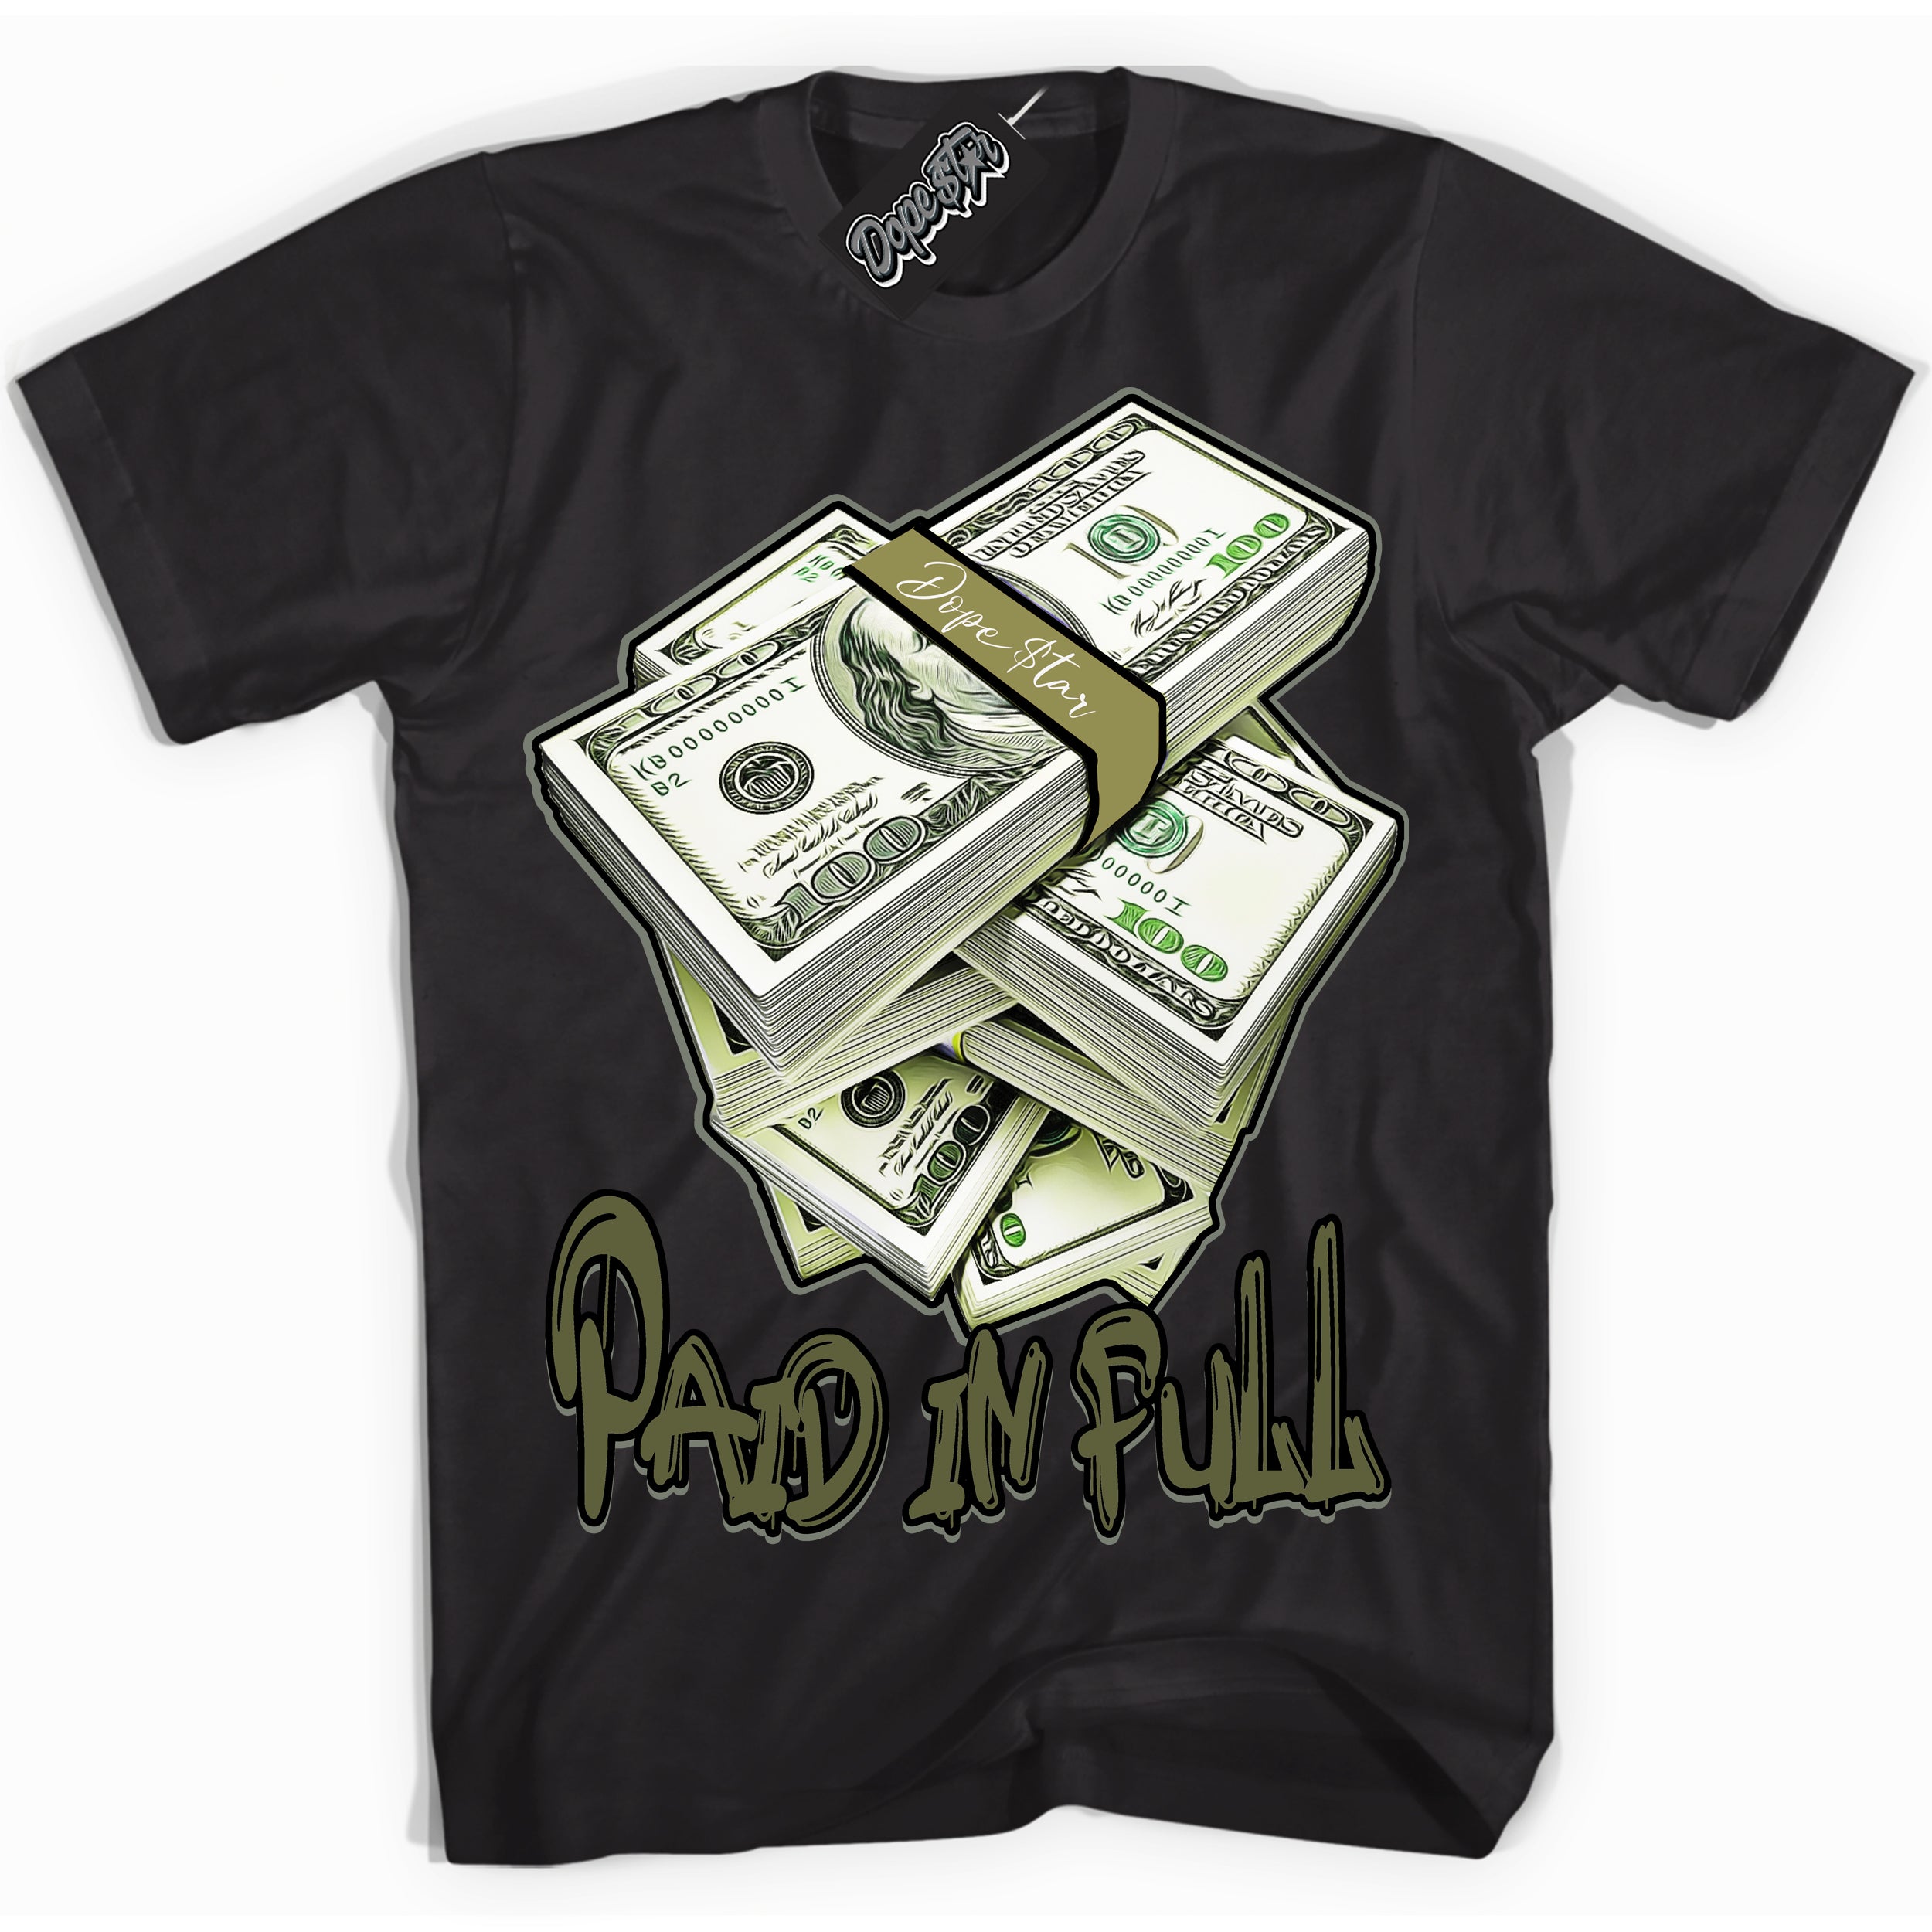 Cool Black graphic tee with “ Paid In Full ” print, that perfectly matches Craft Olive 4s sneakers 